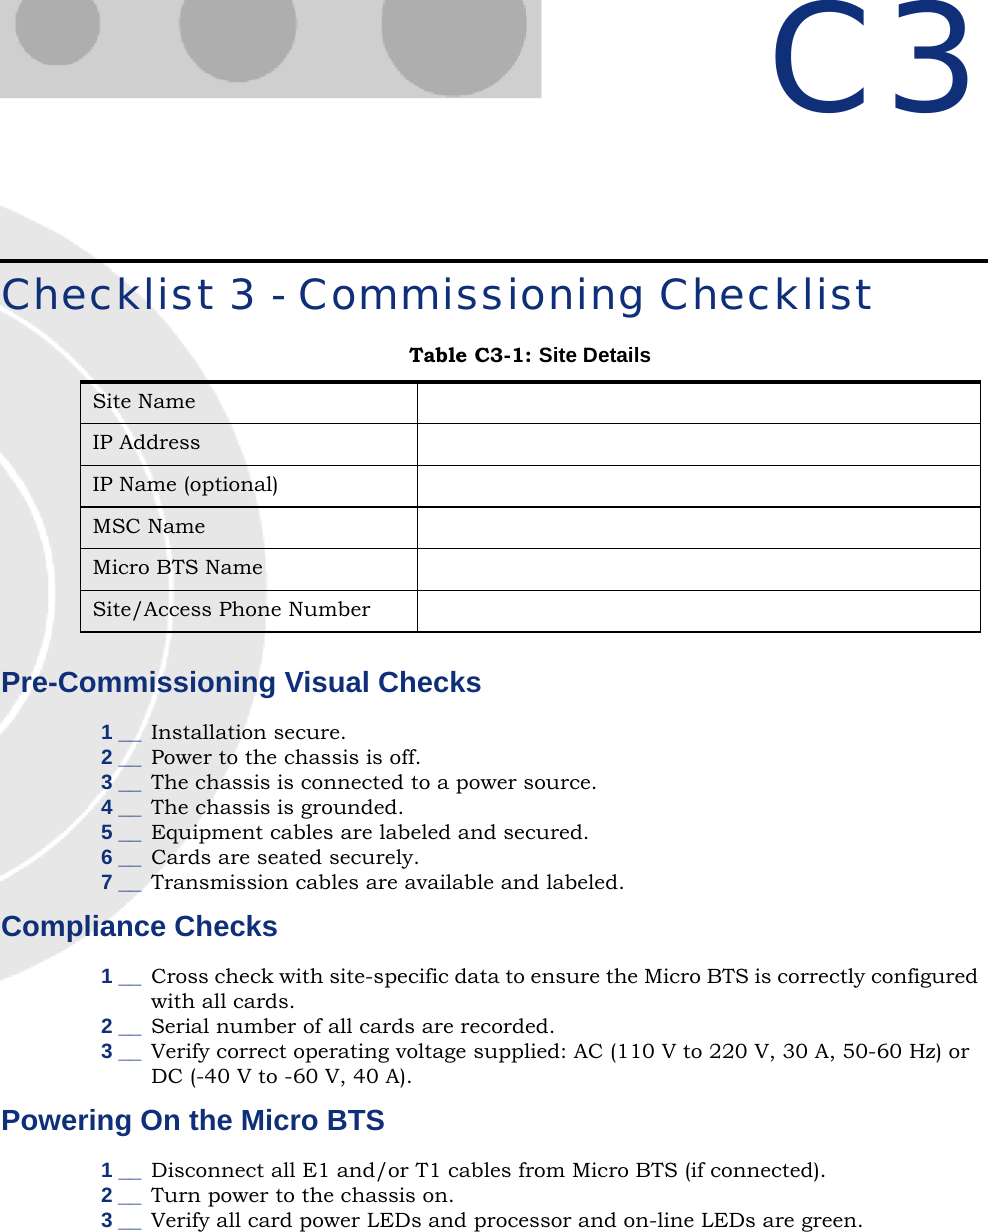 C3Checklist 3 - Commissioning ChecklistPre-Commissioning Visual Checks 1 __ Installation secure.2 __ Power to the chassis is off.3 __ The chassis is connected to a power source.4 __ The chassis is grounded.5 __ Equipment cables are labeled and secured.6 __ Cards are seated securely.7 __ Transmission cables are available and labeled.Compliance Checks1 __ Cross check with site-specific data to ensure the Micro BTS is correctly configured with all cards.2 __ Serial number of all cards are recorded.3 __ Verify correct operating voltage supplied: AC (110 V to 220 V, 30 A, 50-60 Hz) or DC (-40 V to -60 V, 40 A).Powering On the Micro BTS1 __ Disconnect all E1 and/or T1 cables from Micro BTS (if connected).2 __ Turn power to the chassis on.3 __ Verify all card power LEDs and processor and on-line LEDs are green.Table C3-1: Site DetailsSite NameIP AddressIP Name (optional)MSC NameMicro BTS NameSite/Access Phone Number